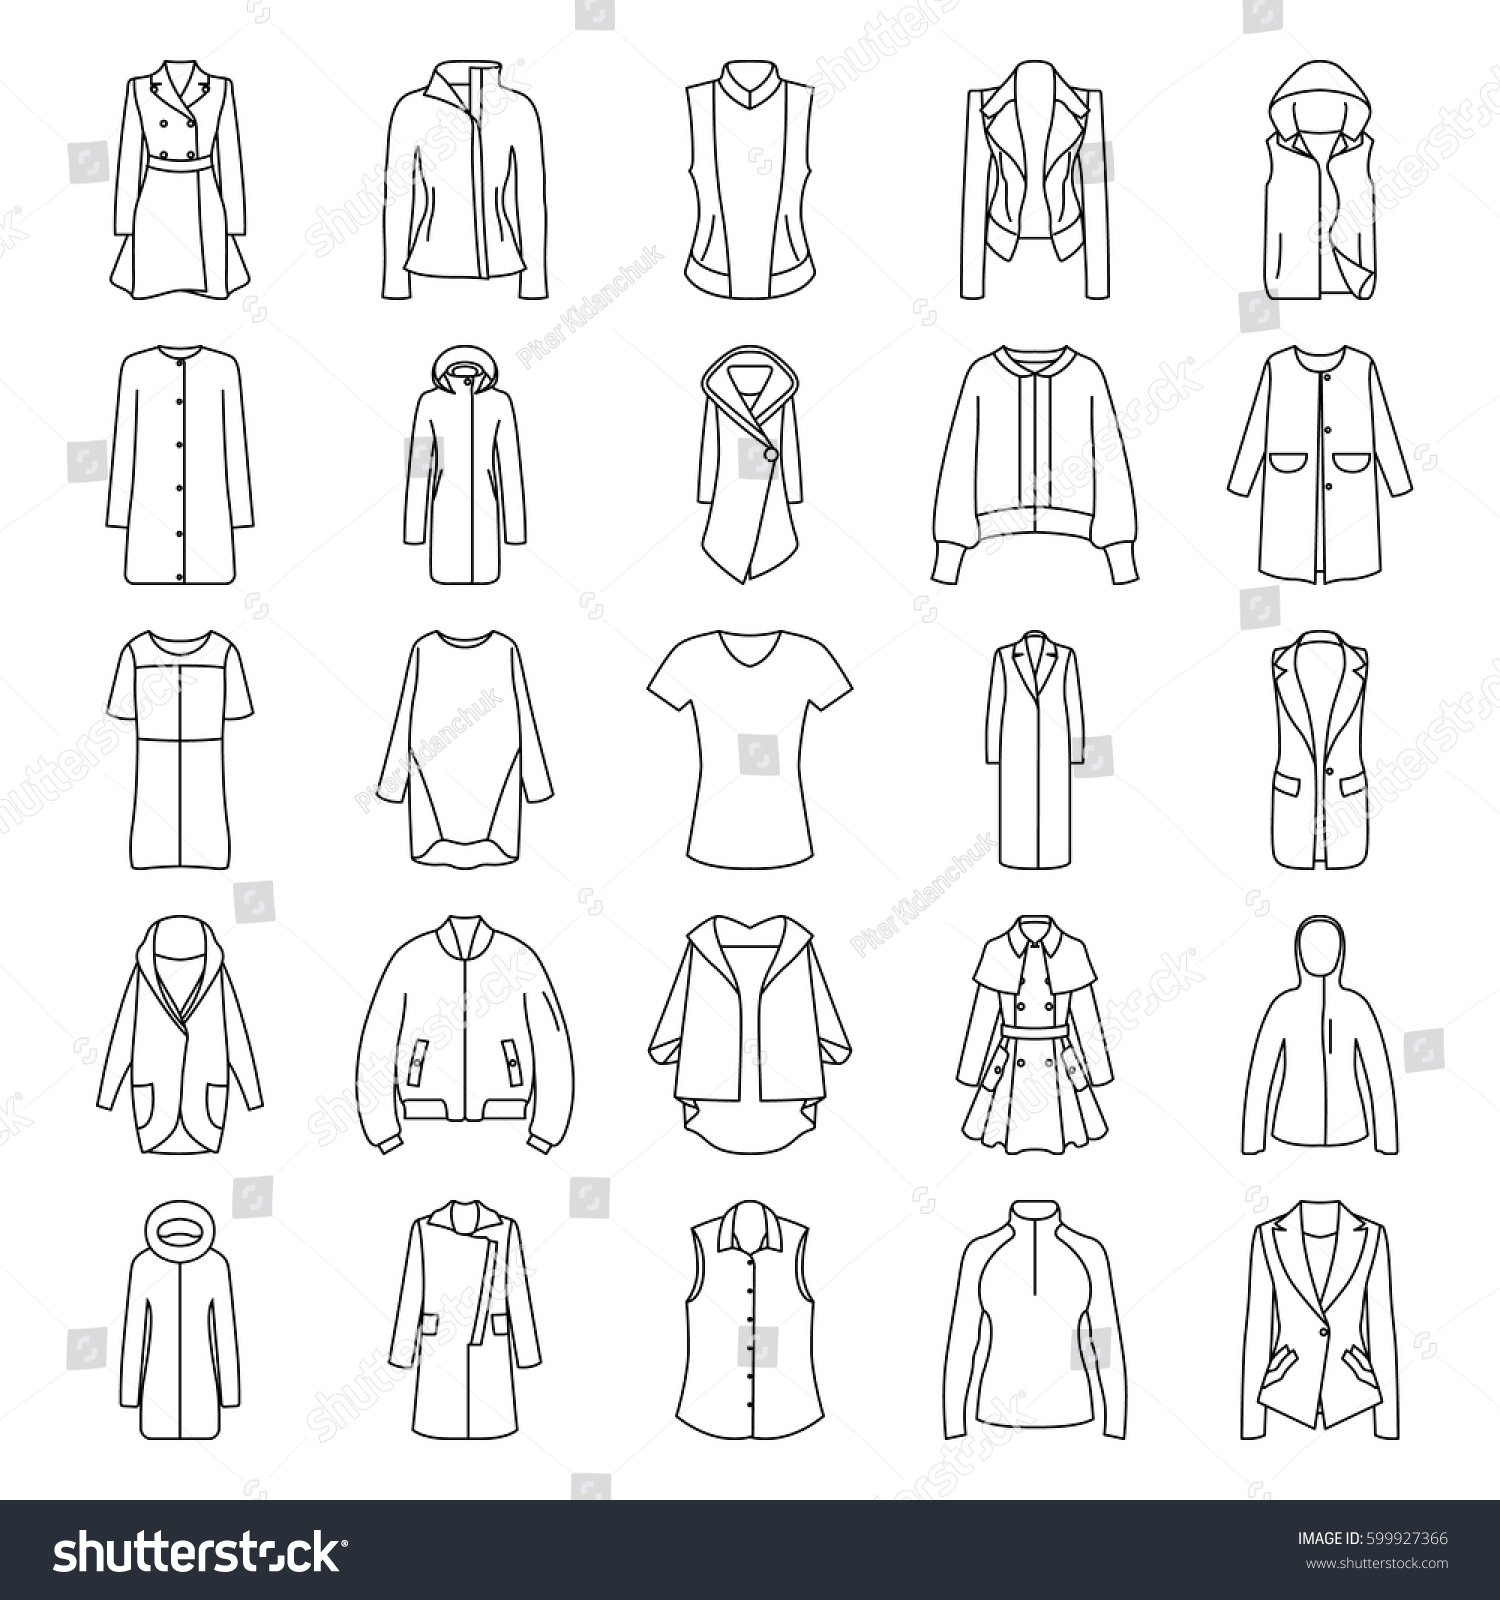 Outdoorclothing Images, Stock Photos & Vectors | Shutterstock